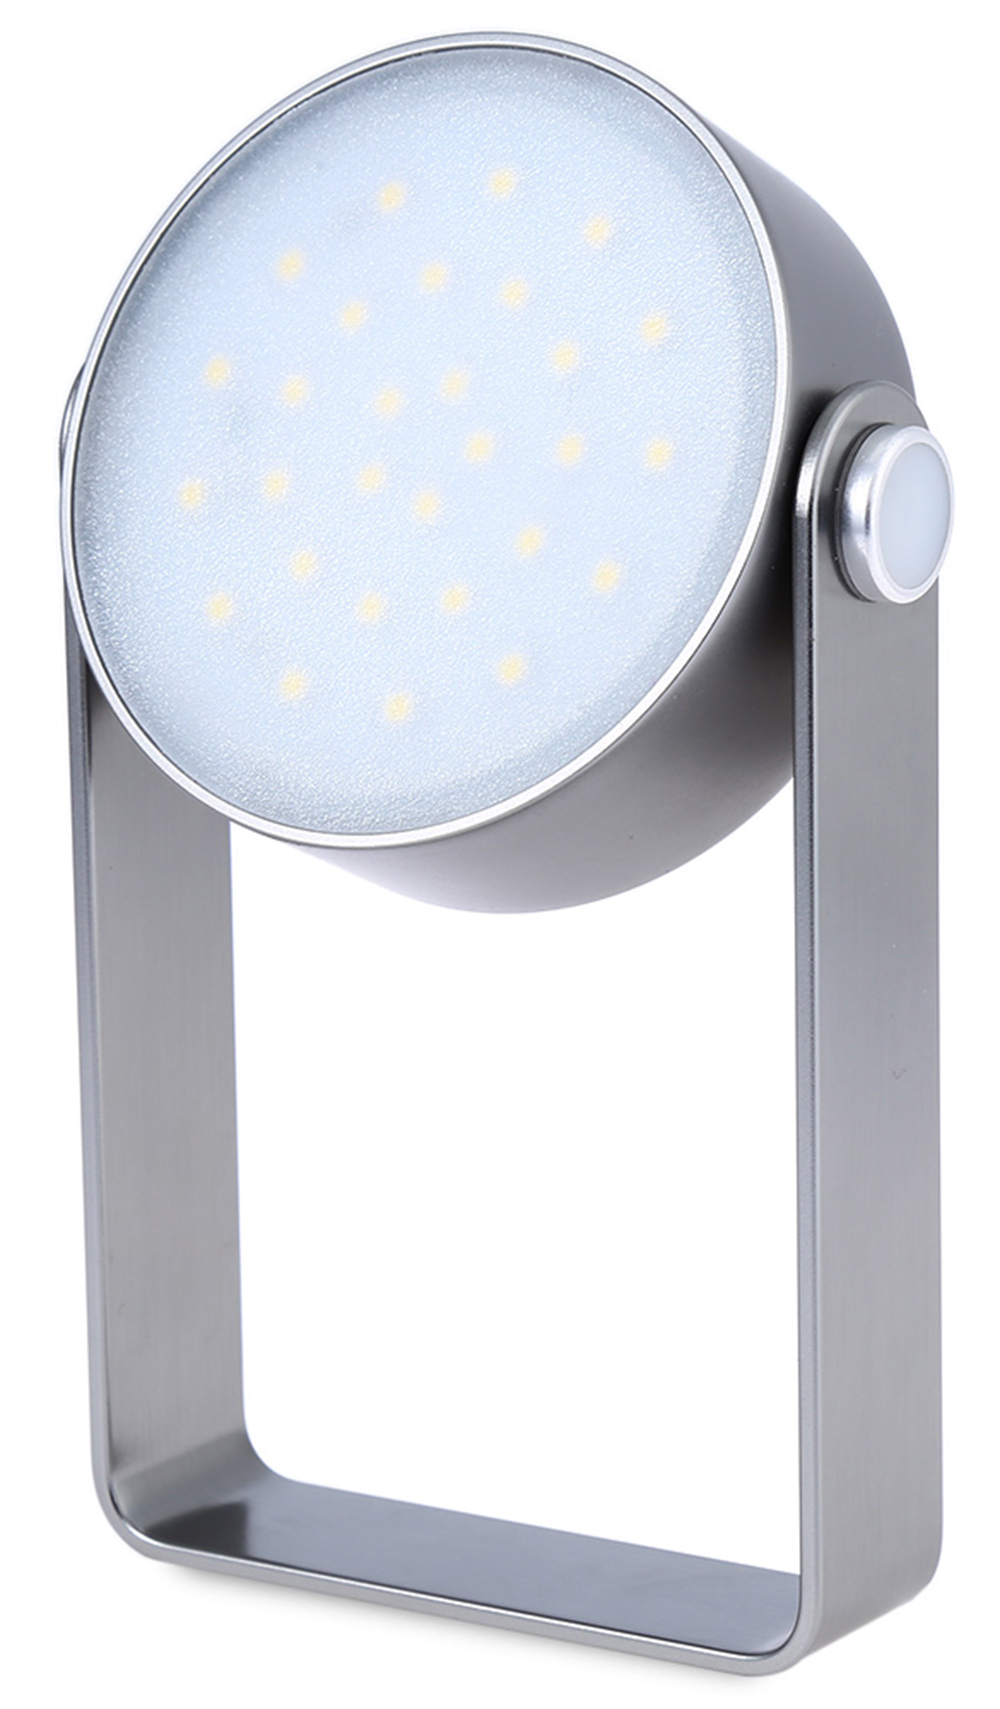 2W 29 LEDs Outdoor Multi-functional Waterproof LED Light Desk Lamp with USB Charging Port